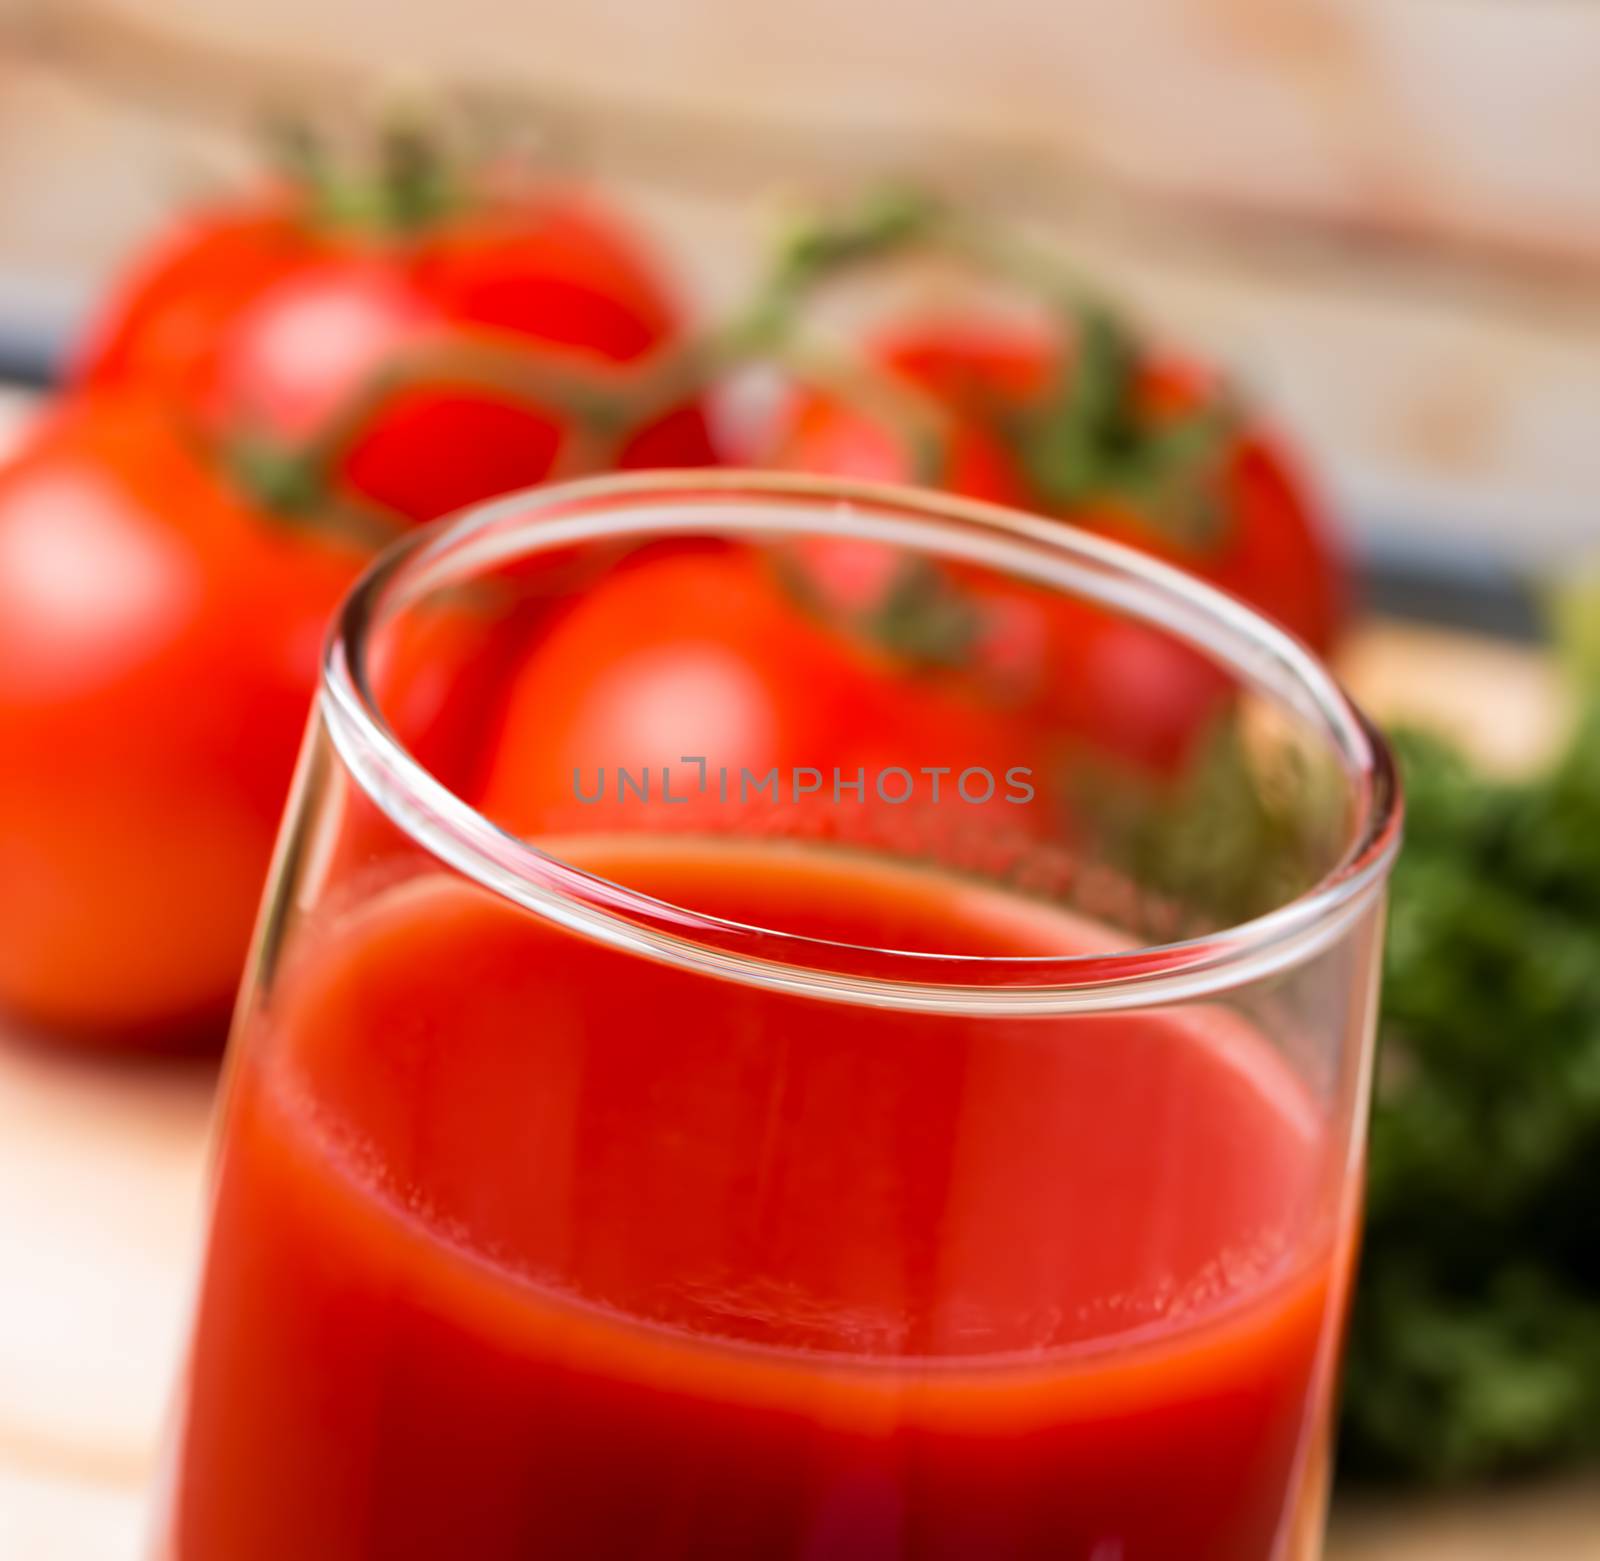 Rip Tomato Juice Represents Drinks Drinking And Refreshing  by stuartmiles